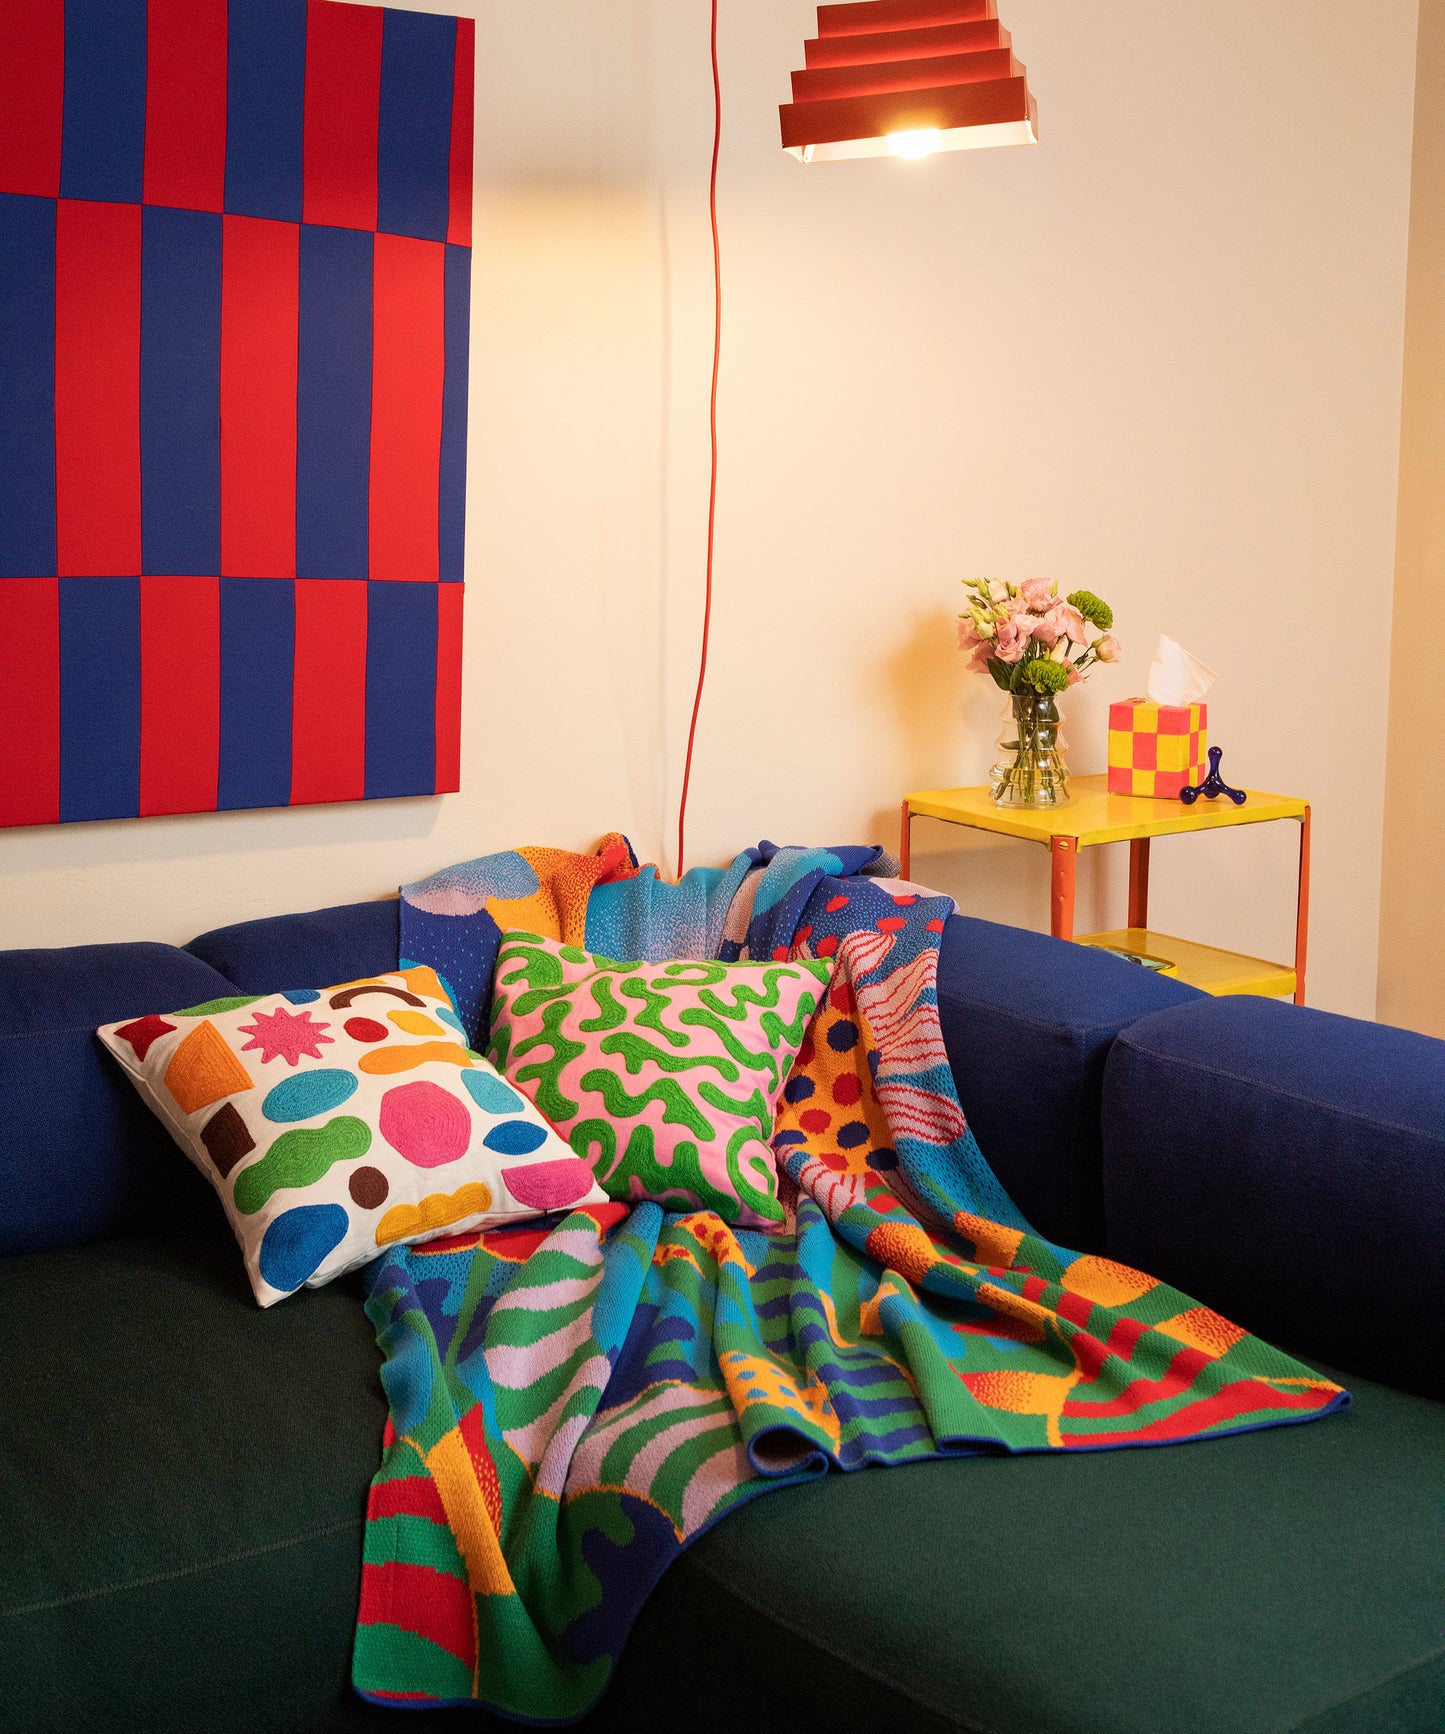 Image of the Best Buds Blanket sprawled over a blue and green sofa located in a colorful living room. On top of the blanket sits the Odds and Ends Pillow Cover and Silly Squiggles Pillow Cover. 